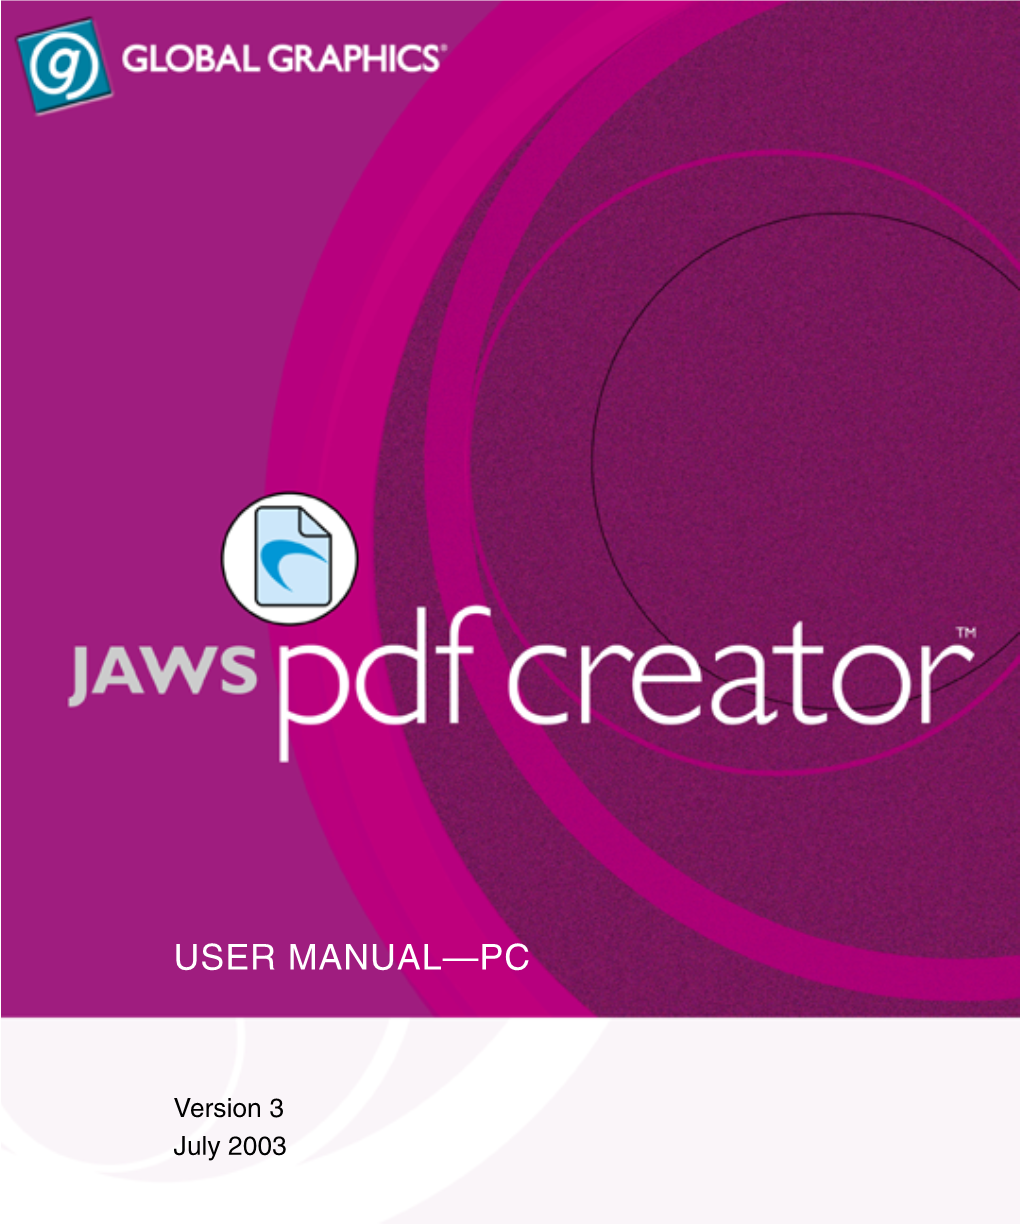 PDF Creator User Manual— PC Version 3 July 2003 Part Number: JAWS-3.3-Pdfcreator Copyright © 1992–2003 GLOBAL GRAPHICS SOFTWARE LIMITED All Rights Reserved